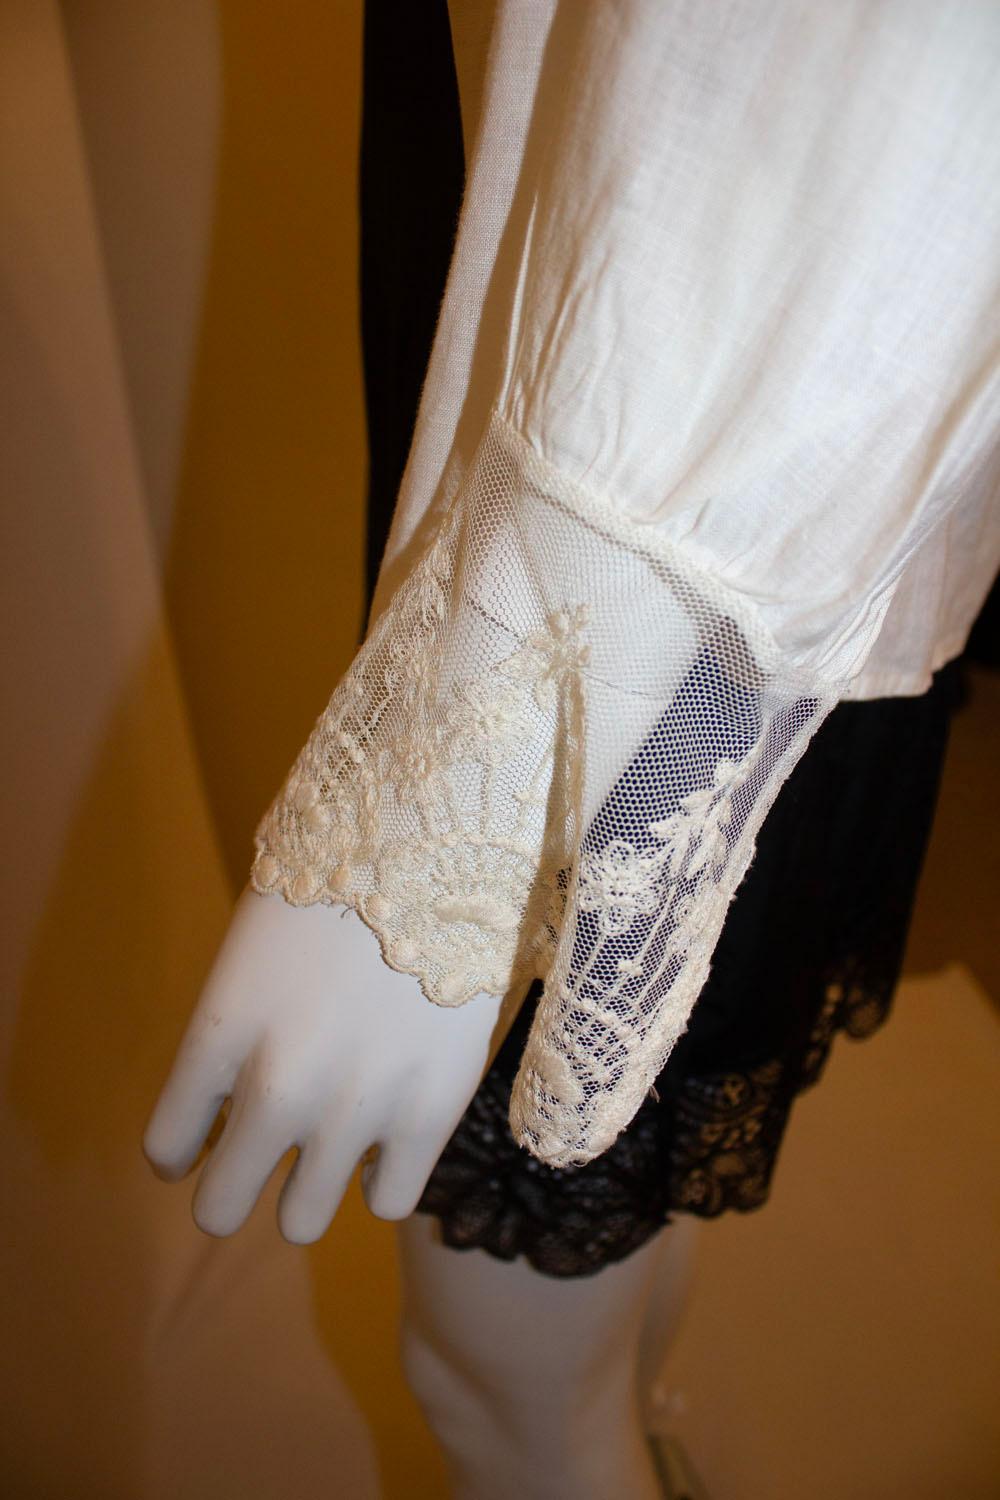 A pretty and easy to wear  vintage linen and lace blouse by Ralph Lauren. 
The blouse has a lace shawl collar and cuffs, and is in excellent condition. Size 10.
Measurements: Bust up to 39'', length 24''